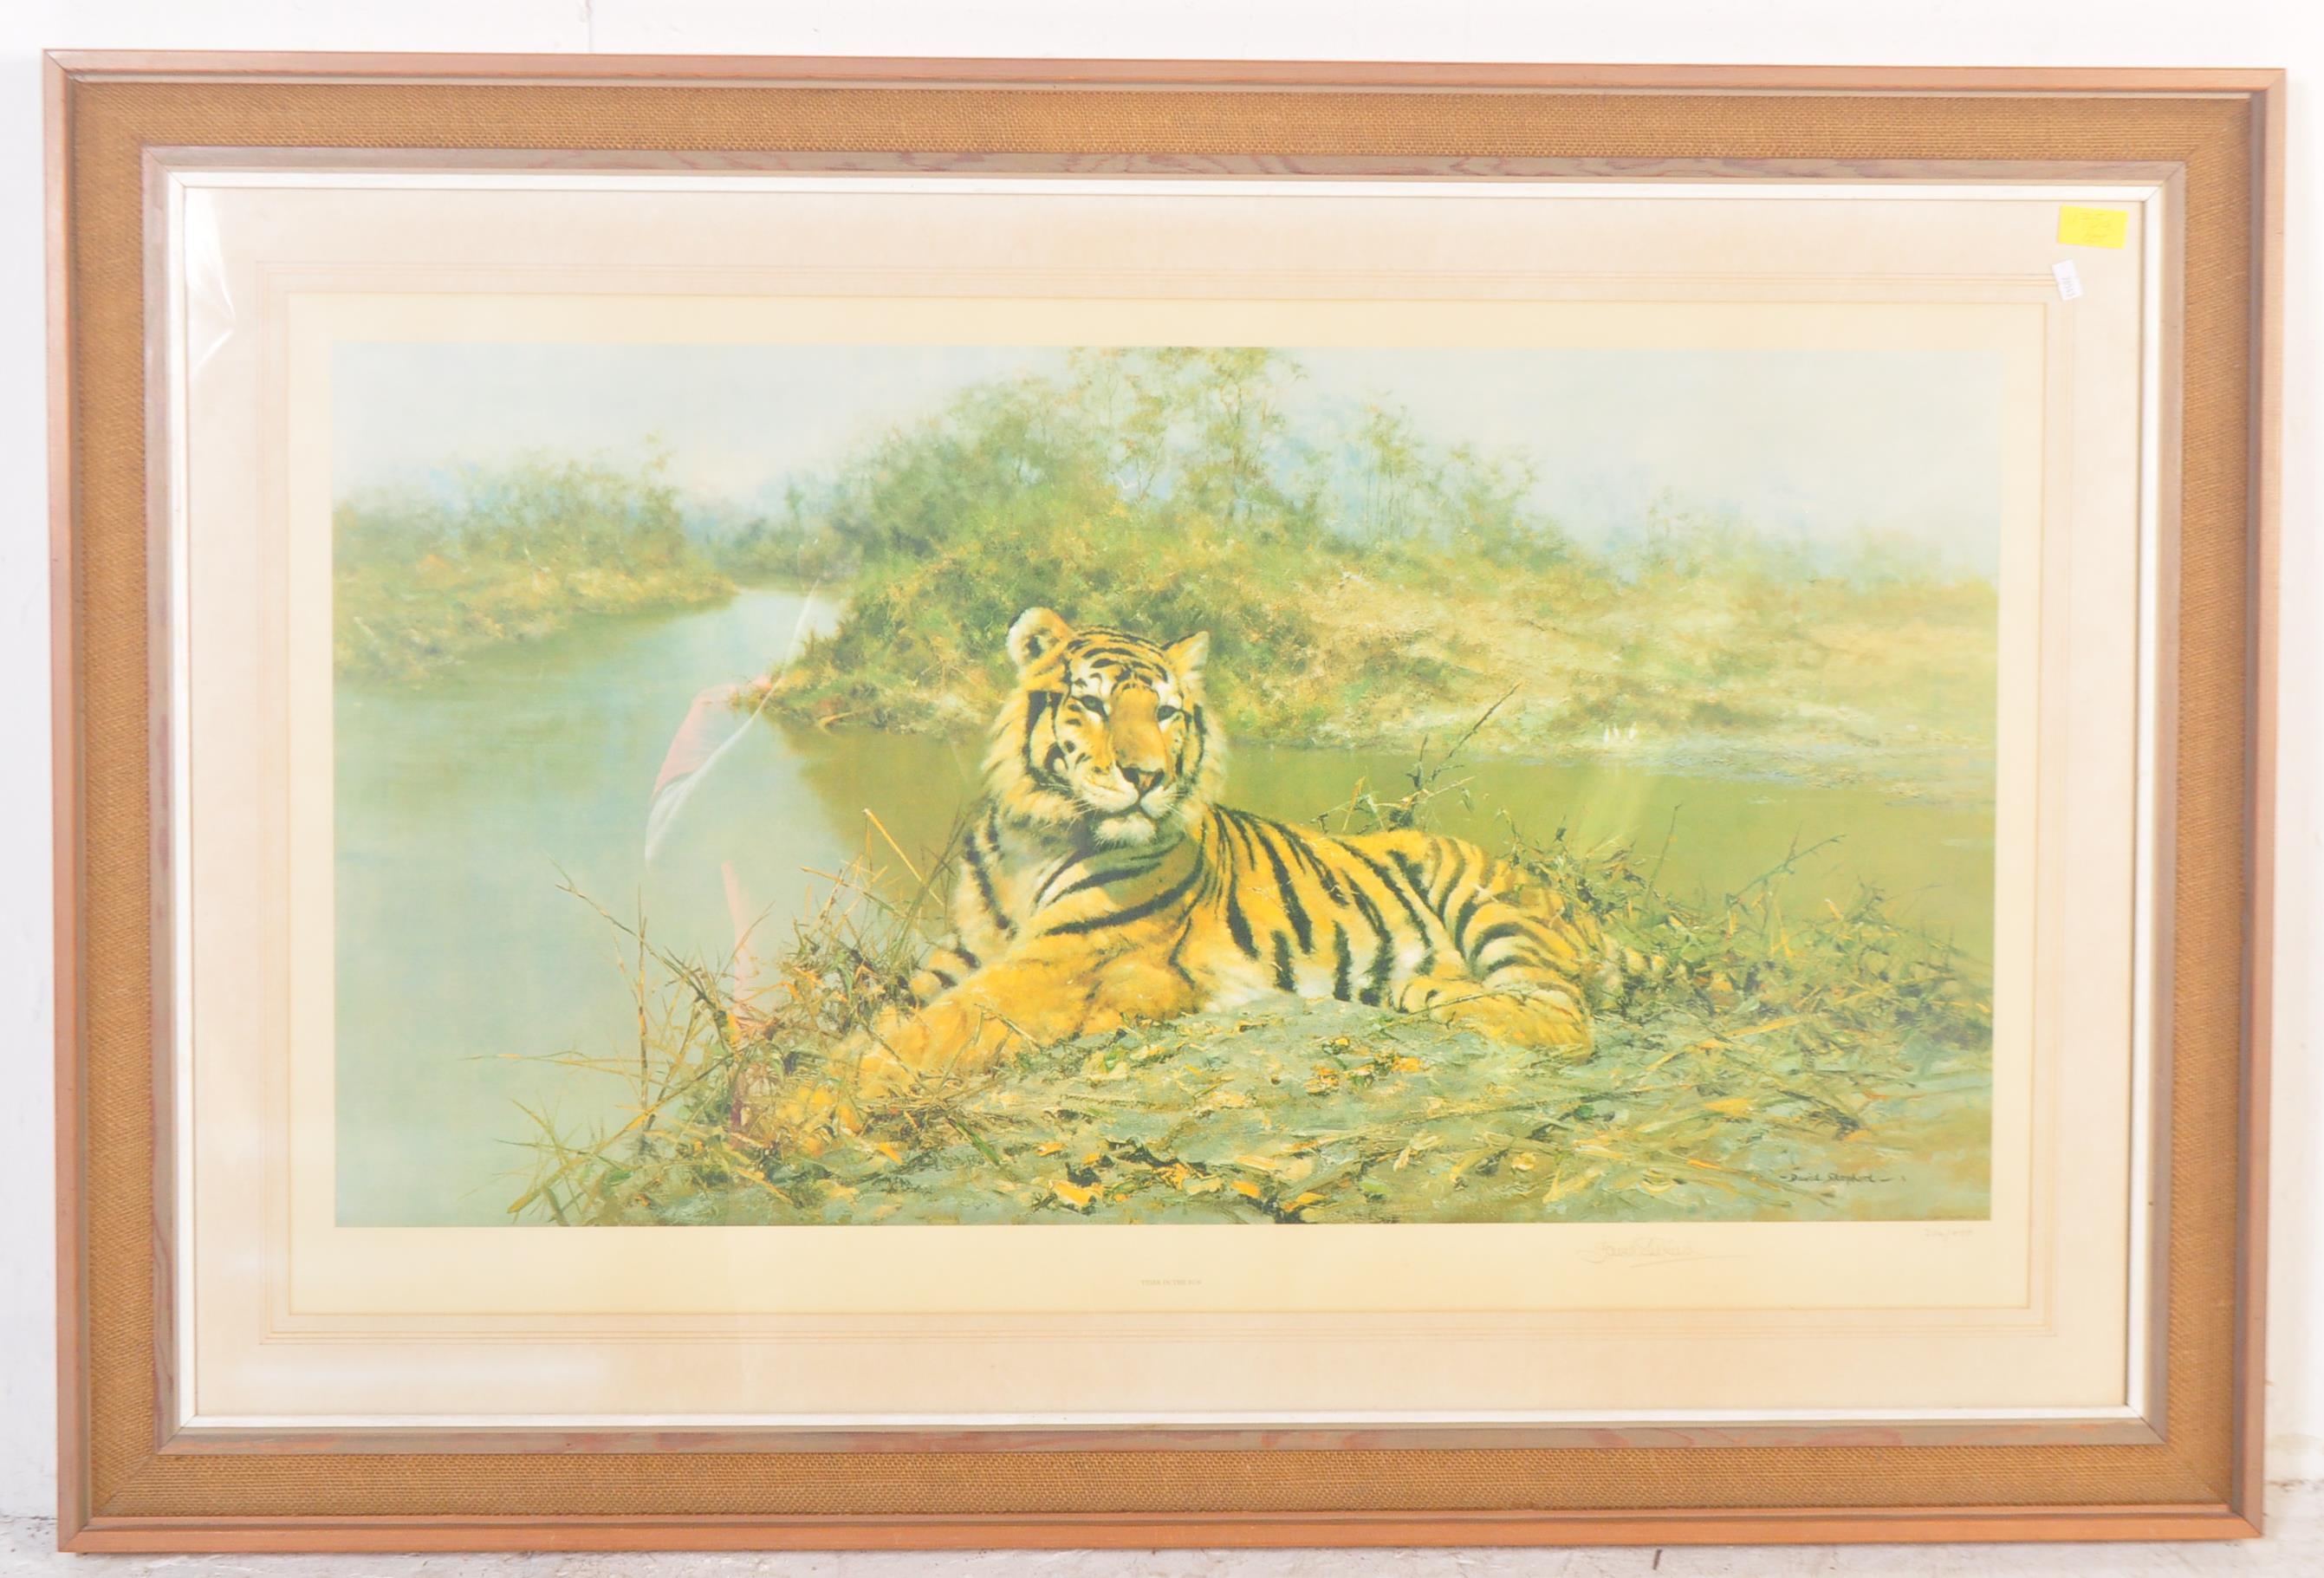 DAVID SHEPERD - TIGER RESTING IN THE SUN - LIMITED EDITION PRINT